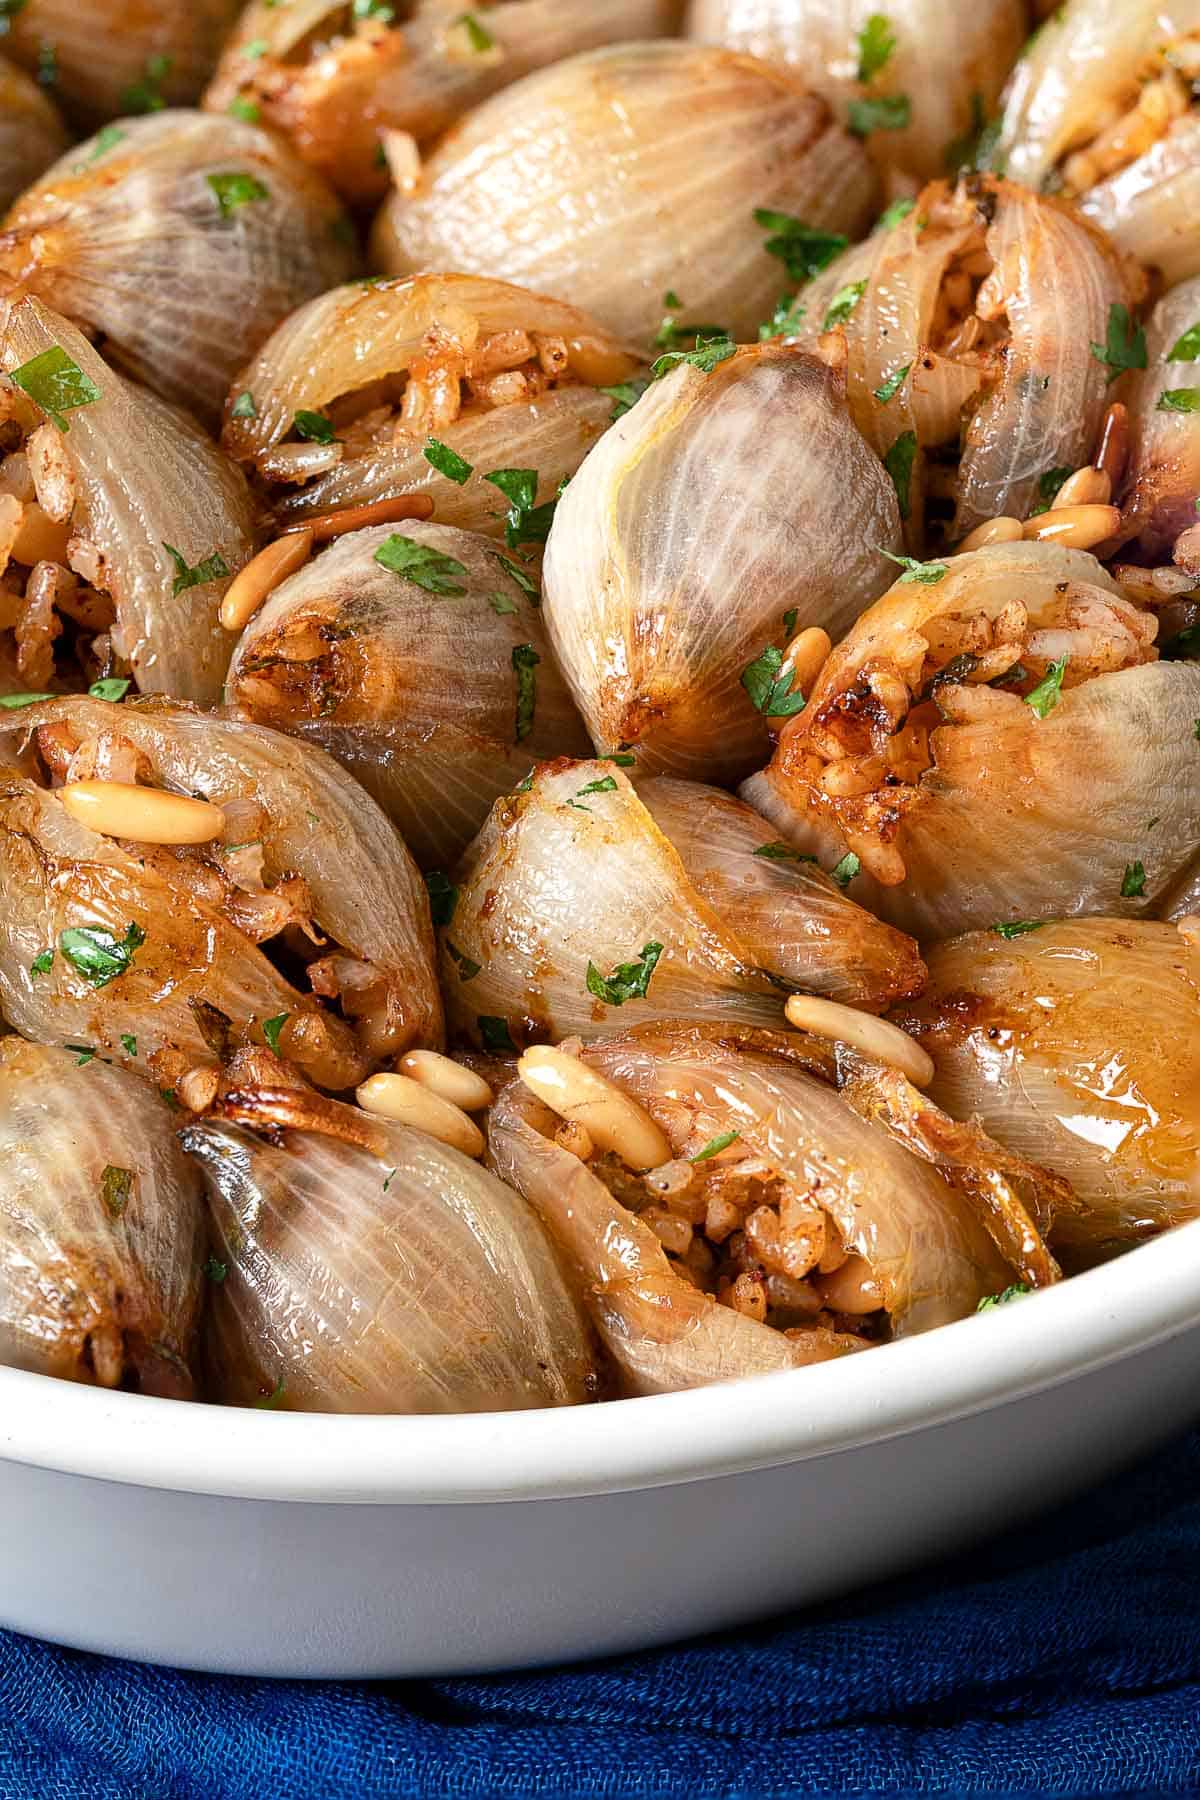 What Can I Substitute for Onions in My Recipes? Here Are 13 Great